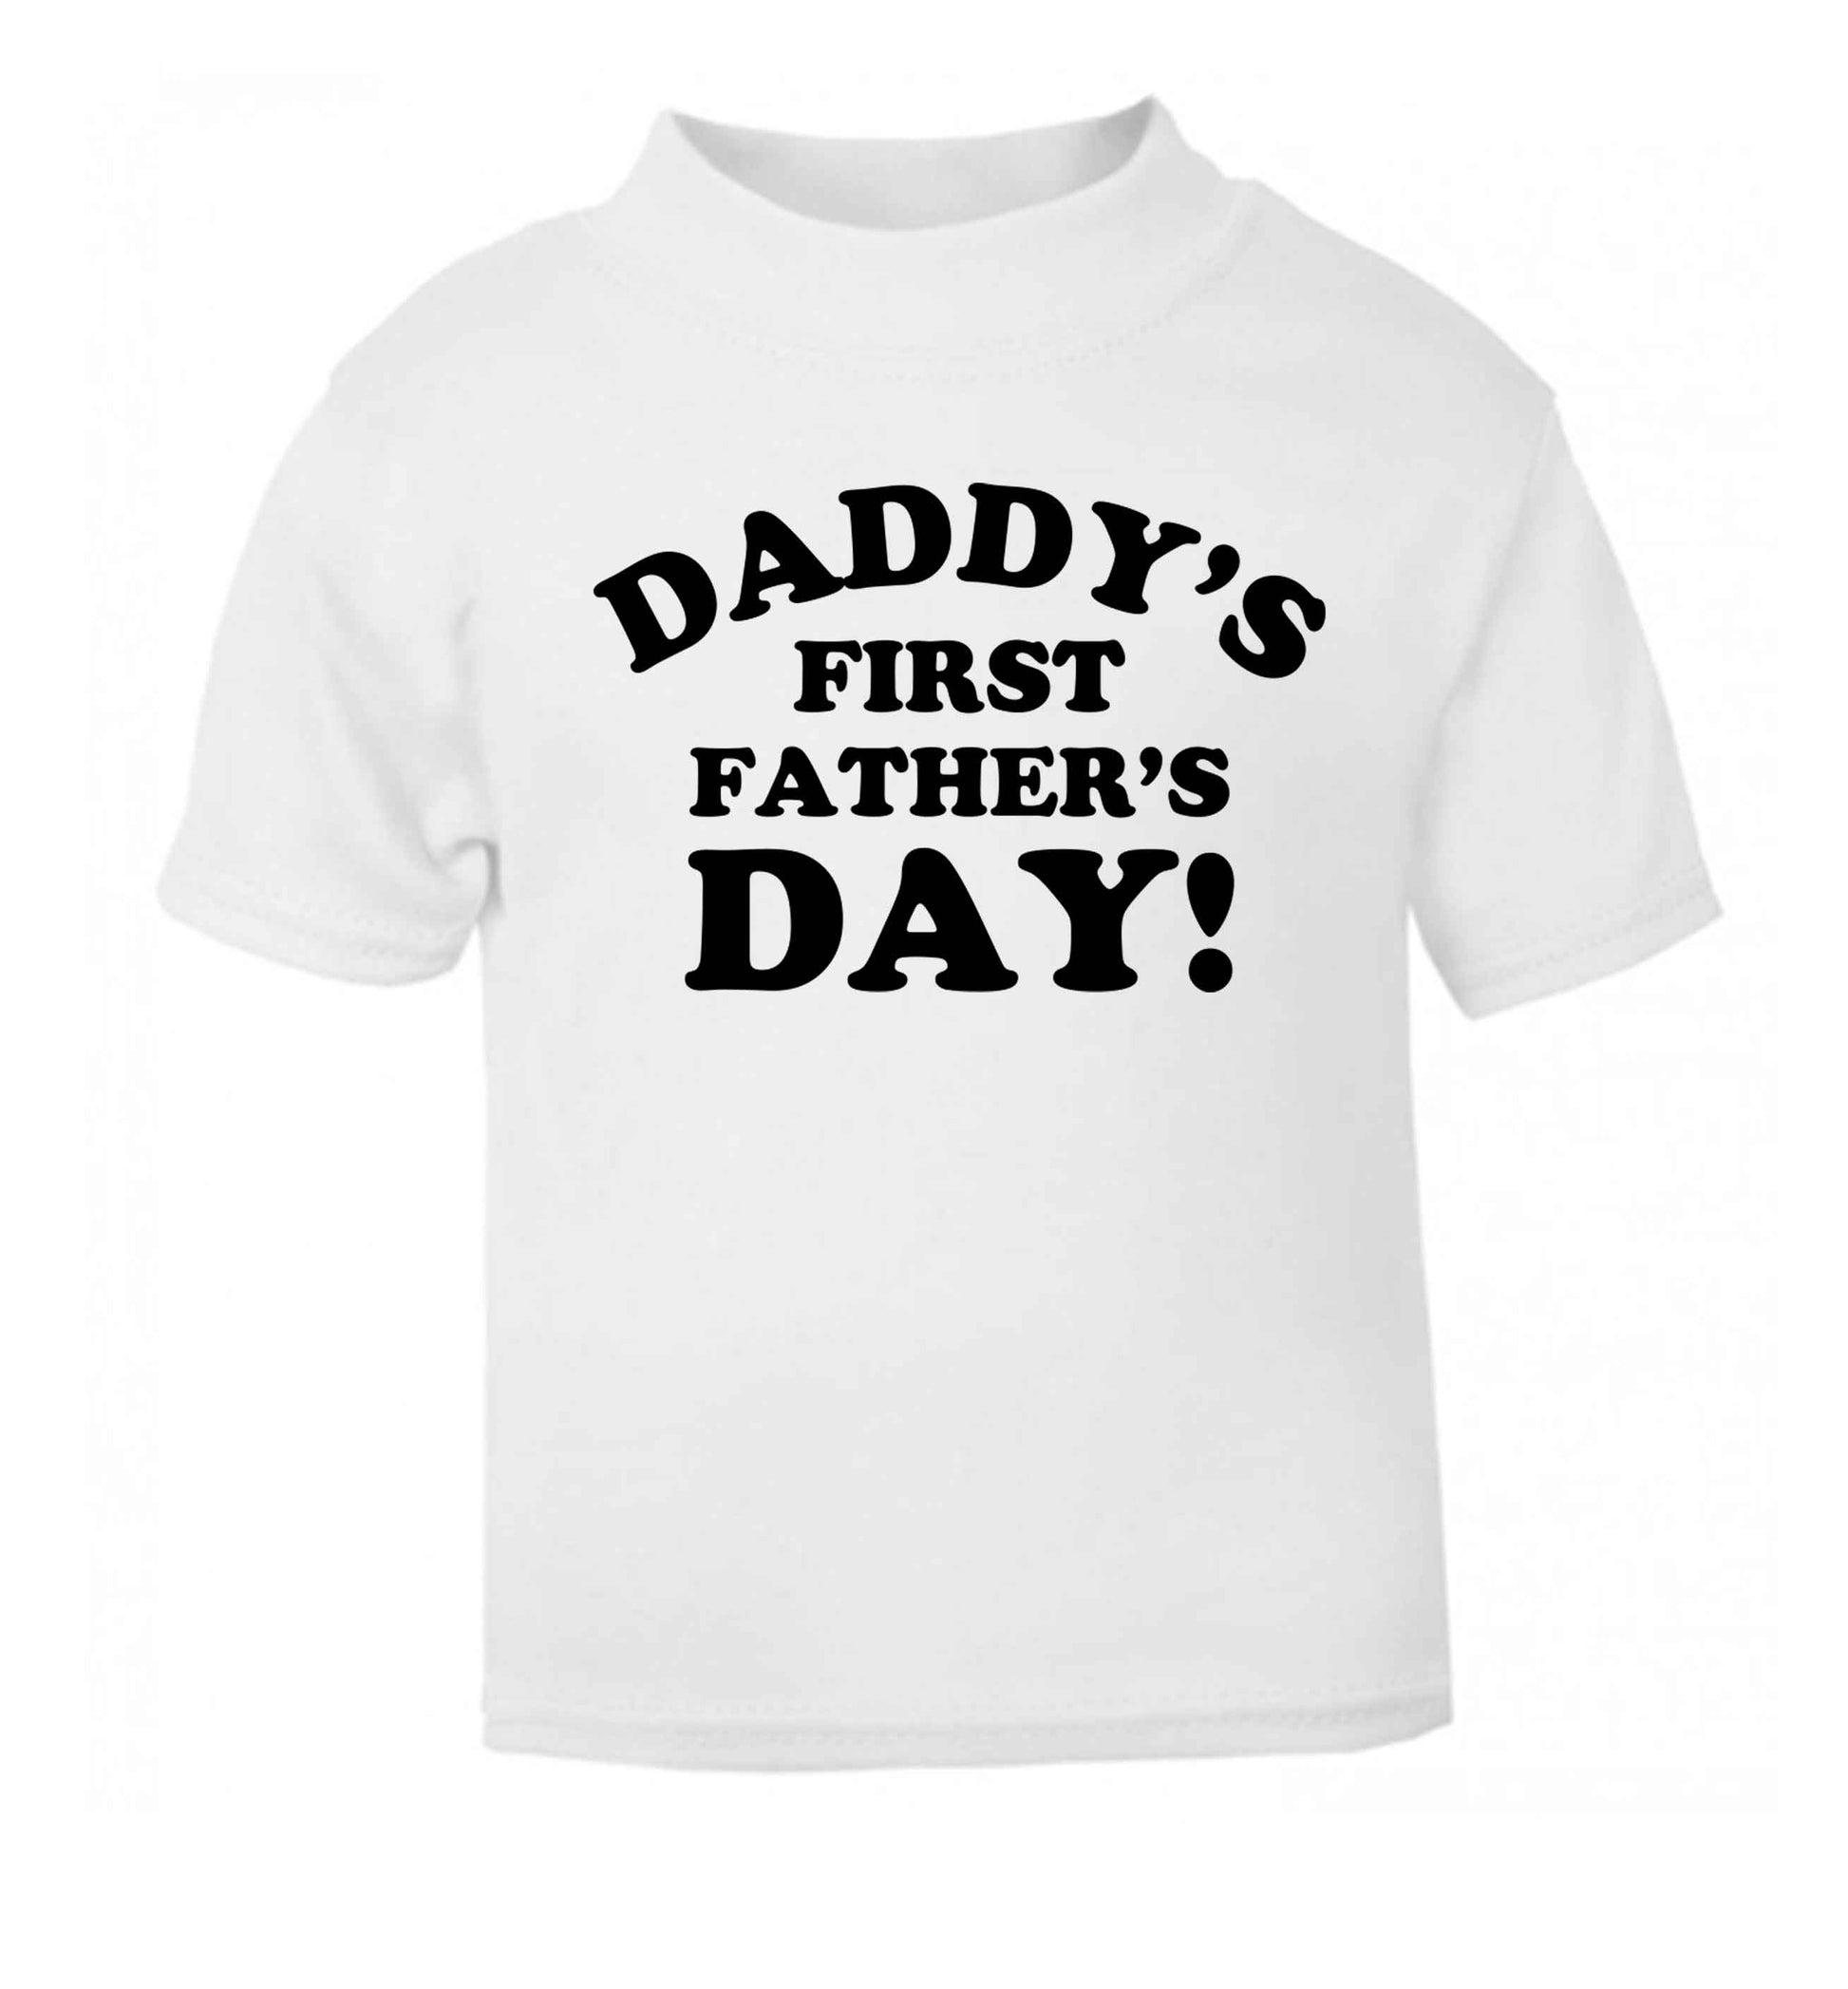 Daddy's first father's day white baby toddler Tshirt 2 Years